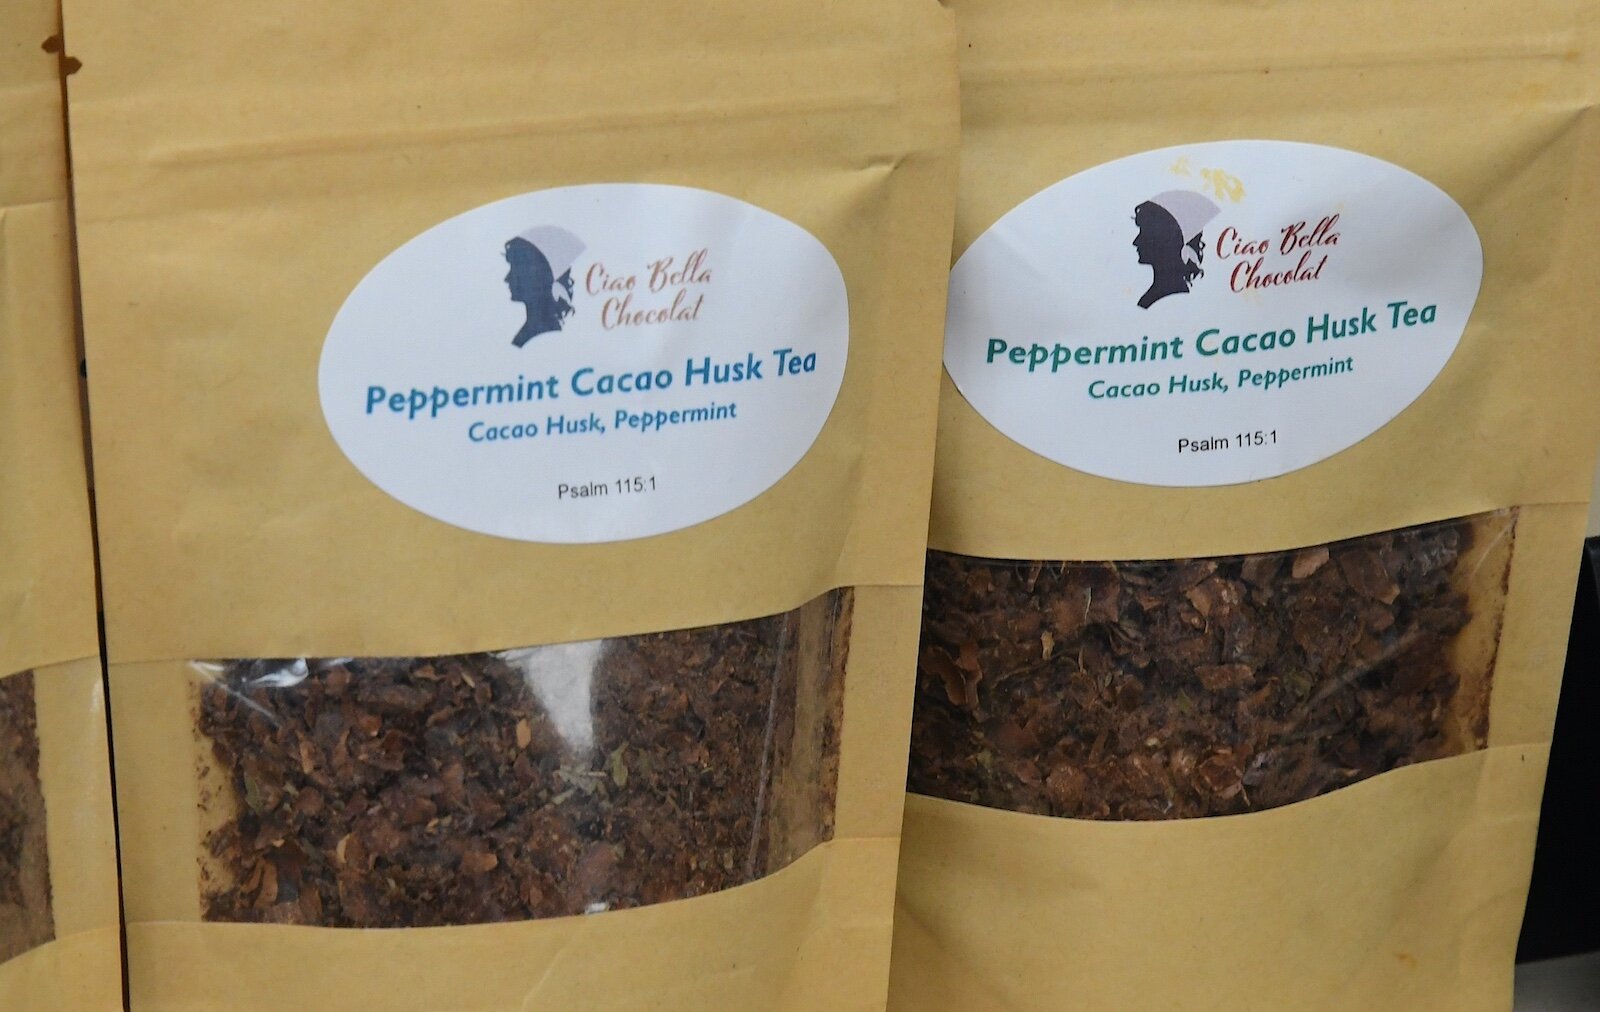 Teas made from cacao husks are for sale at Ciao Bella Chocolate. 18-19 Karen Pacella is the owner of Ciao Bella Chocolat.